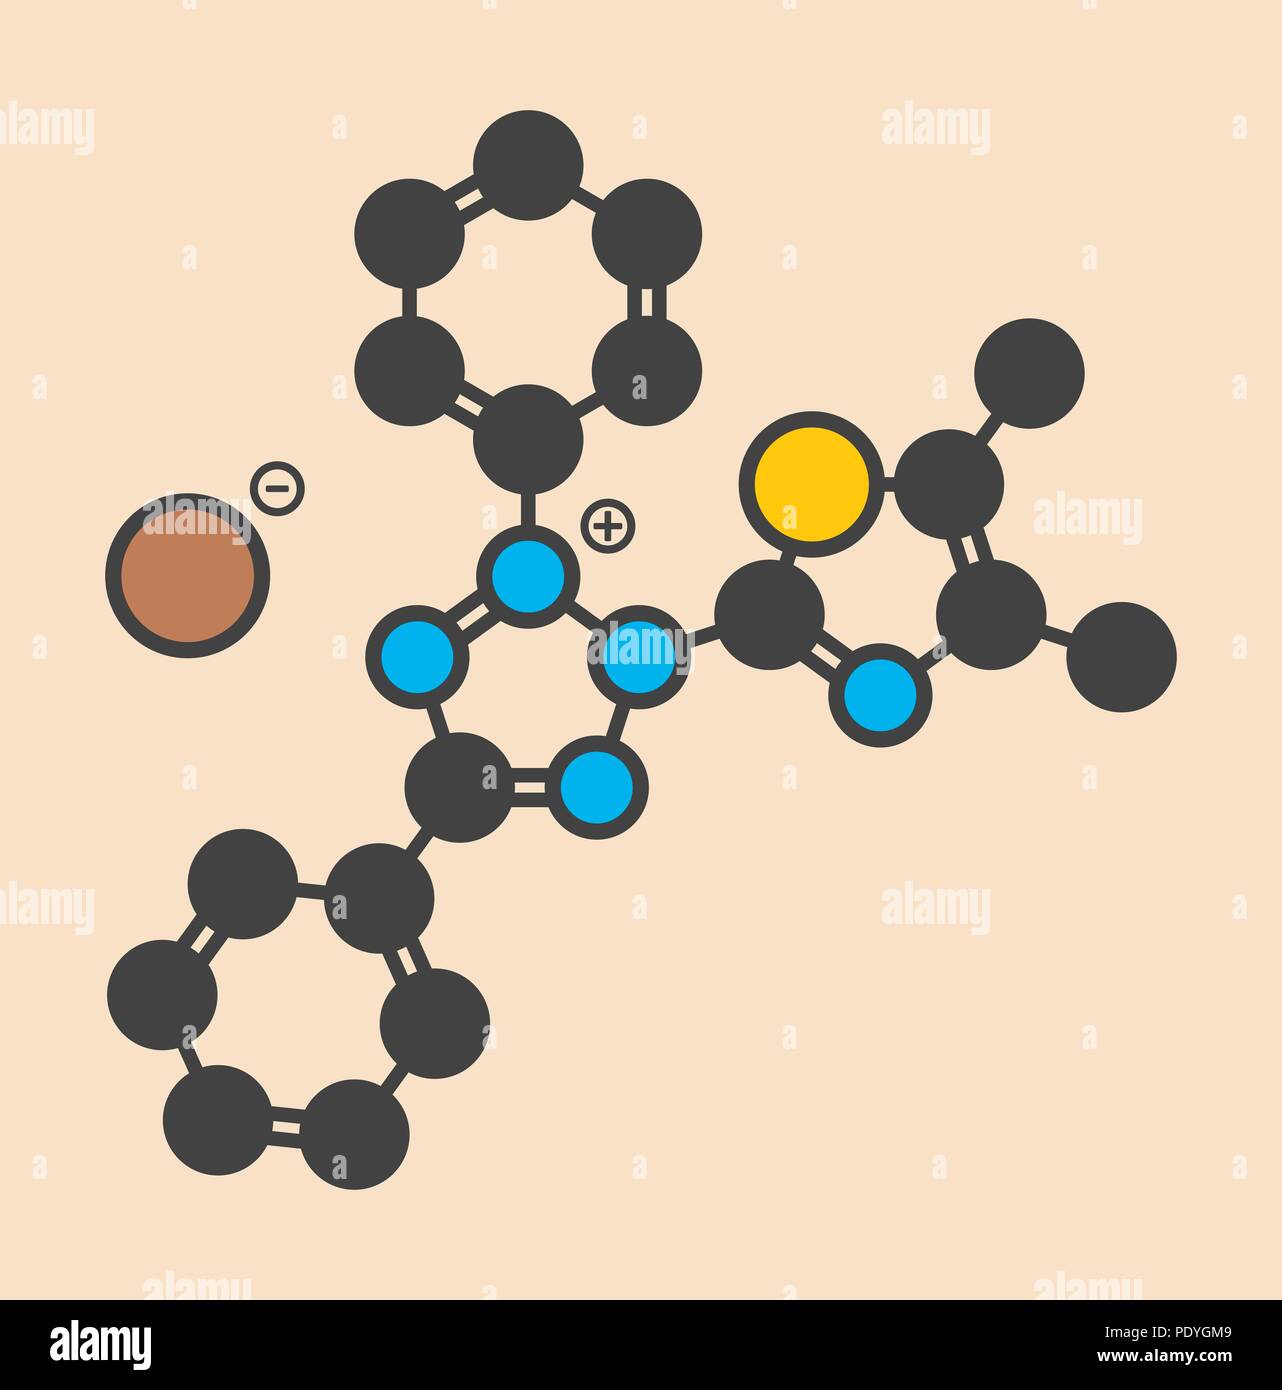 MTT yellow tetrazole dye molecule. Used in MTT assay, used to measure cytotoxicity and cell metabolic activity. Stylized skeletal formula (chemical structure): Atoms are shown as colour-coded circles: hydrogen (hidden), carbon (grey), oxygen (red), nitrogen (blue), sulfur (yellow), bromine (brown). Stock Photo